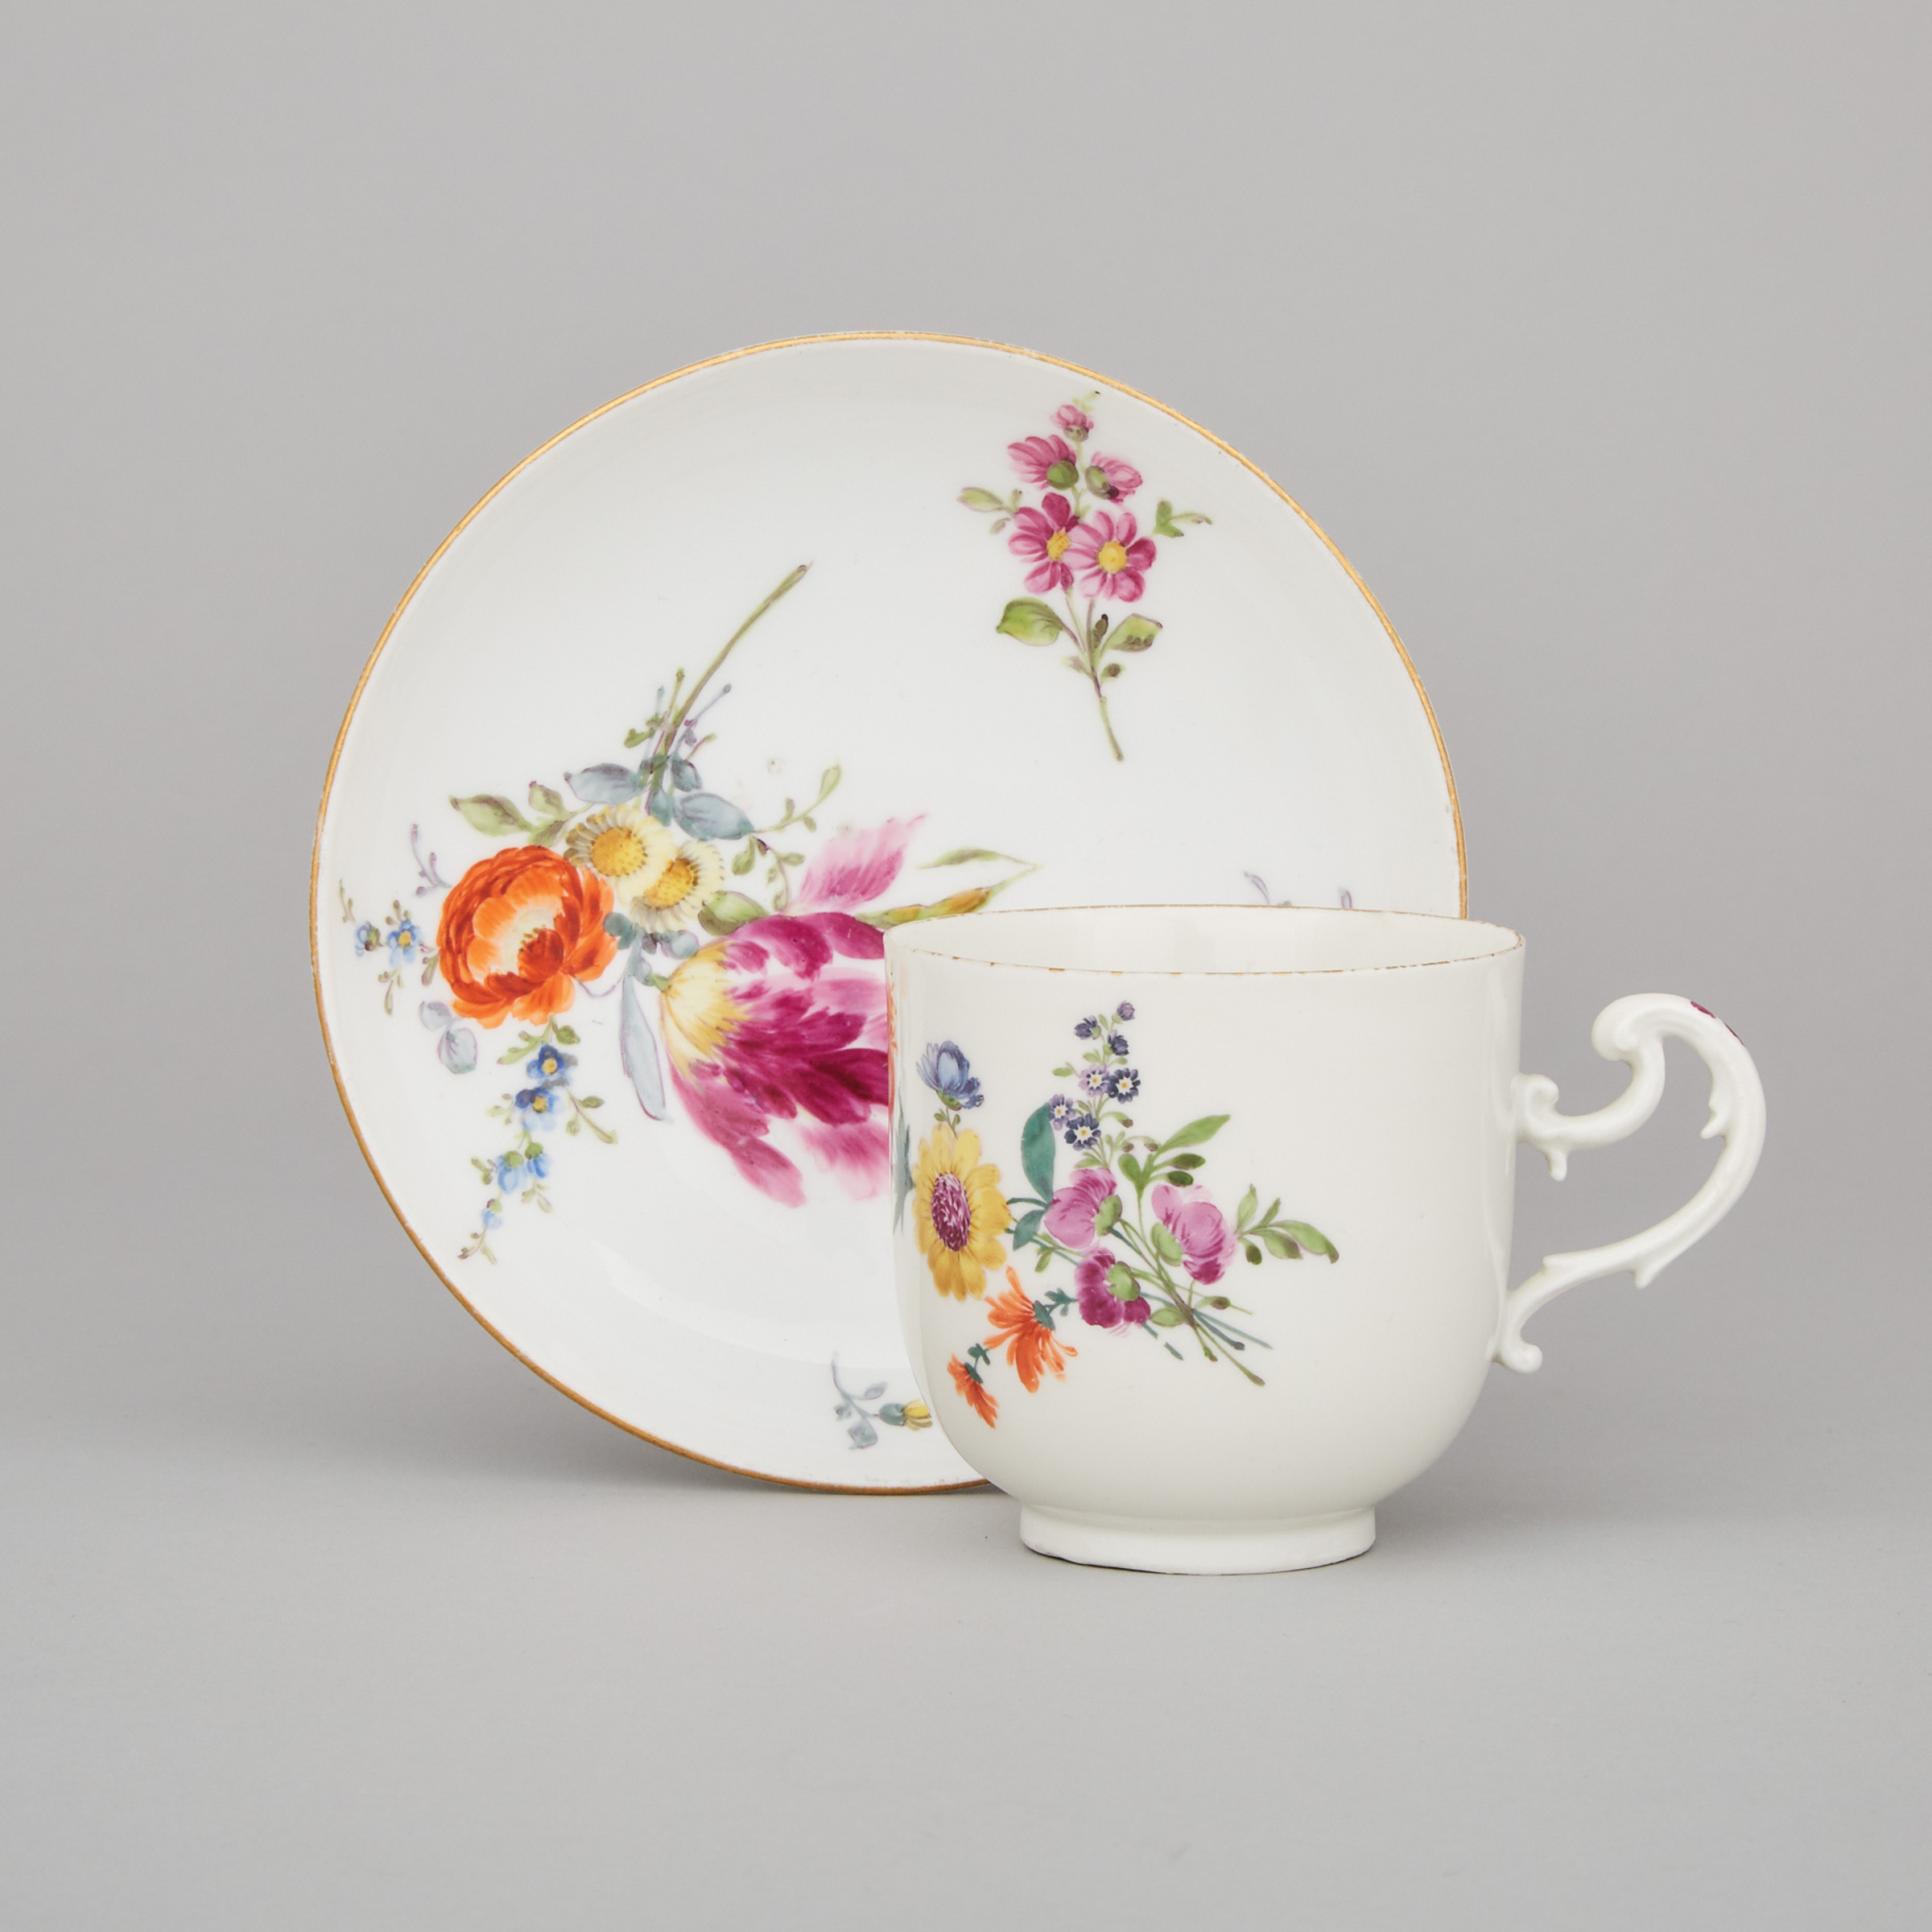 Meissen Cup and Saucer, late 18th century